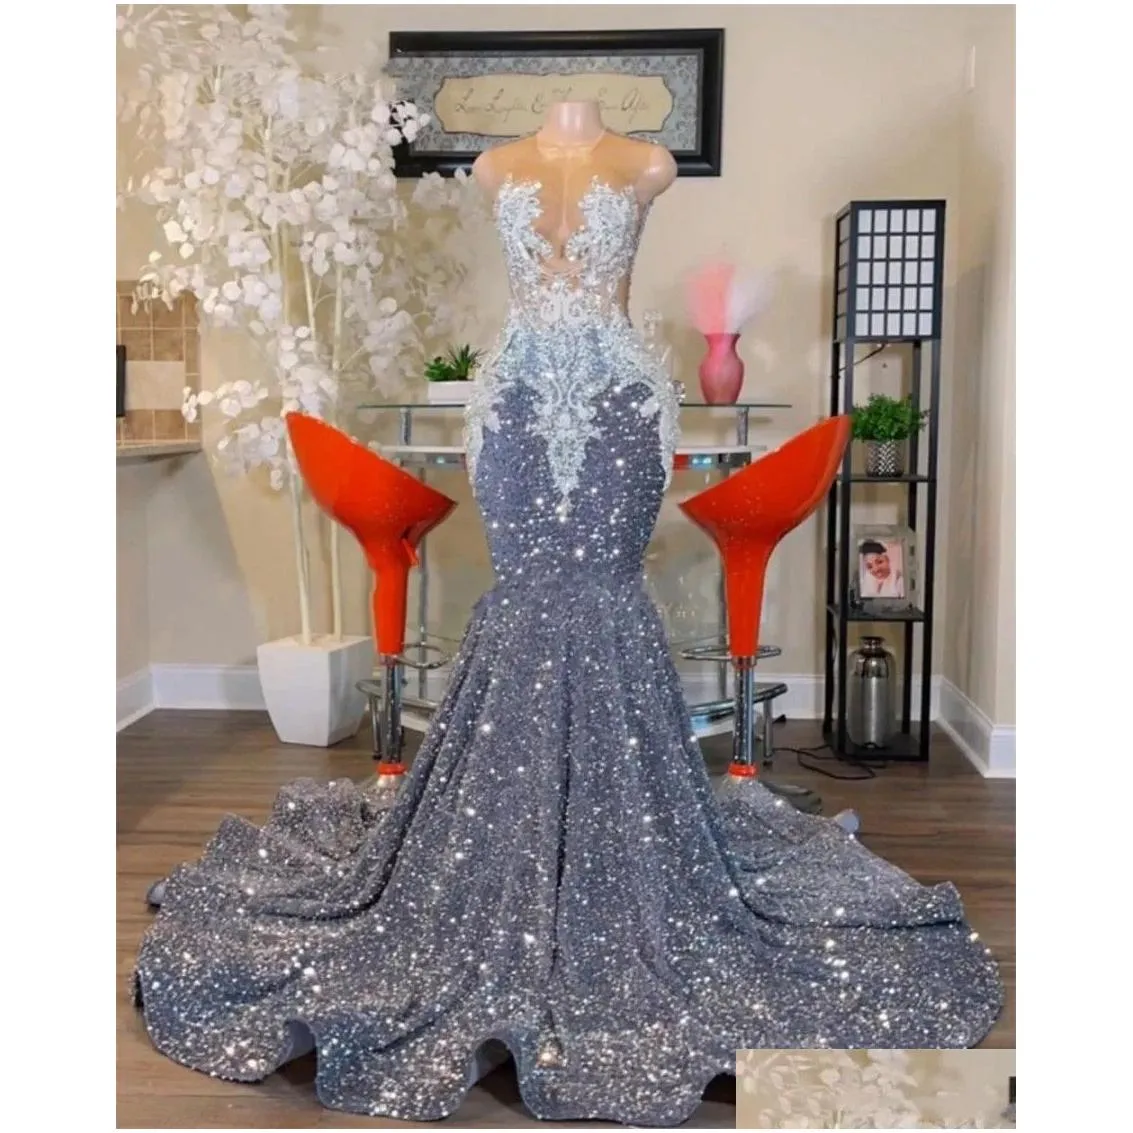 Popular Sell Grey Silver Mermaid Prom Dresses With White Appliques Sheer Jewel Neck Sequins Bling Long Evening Gowns Vestidos de bal